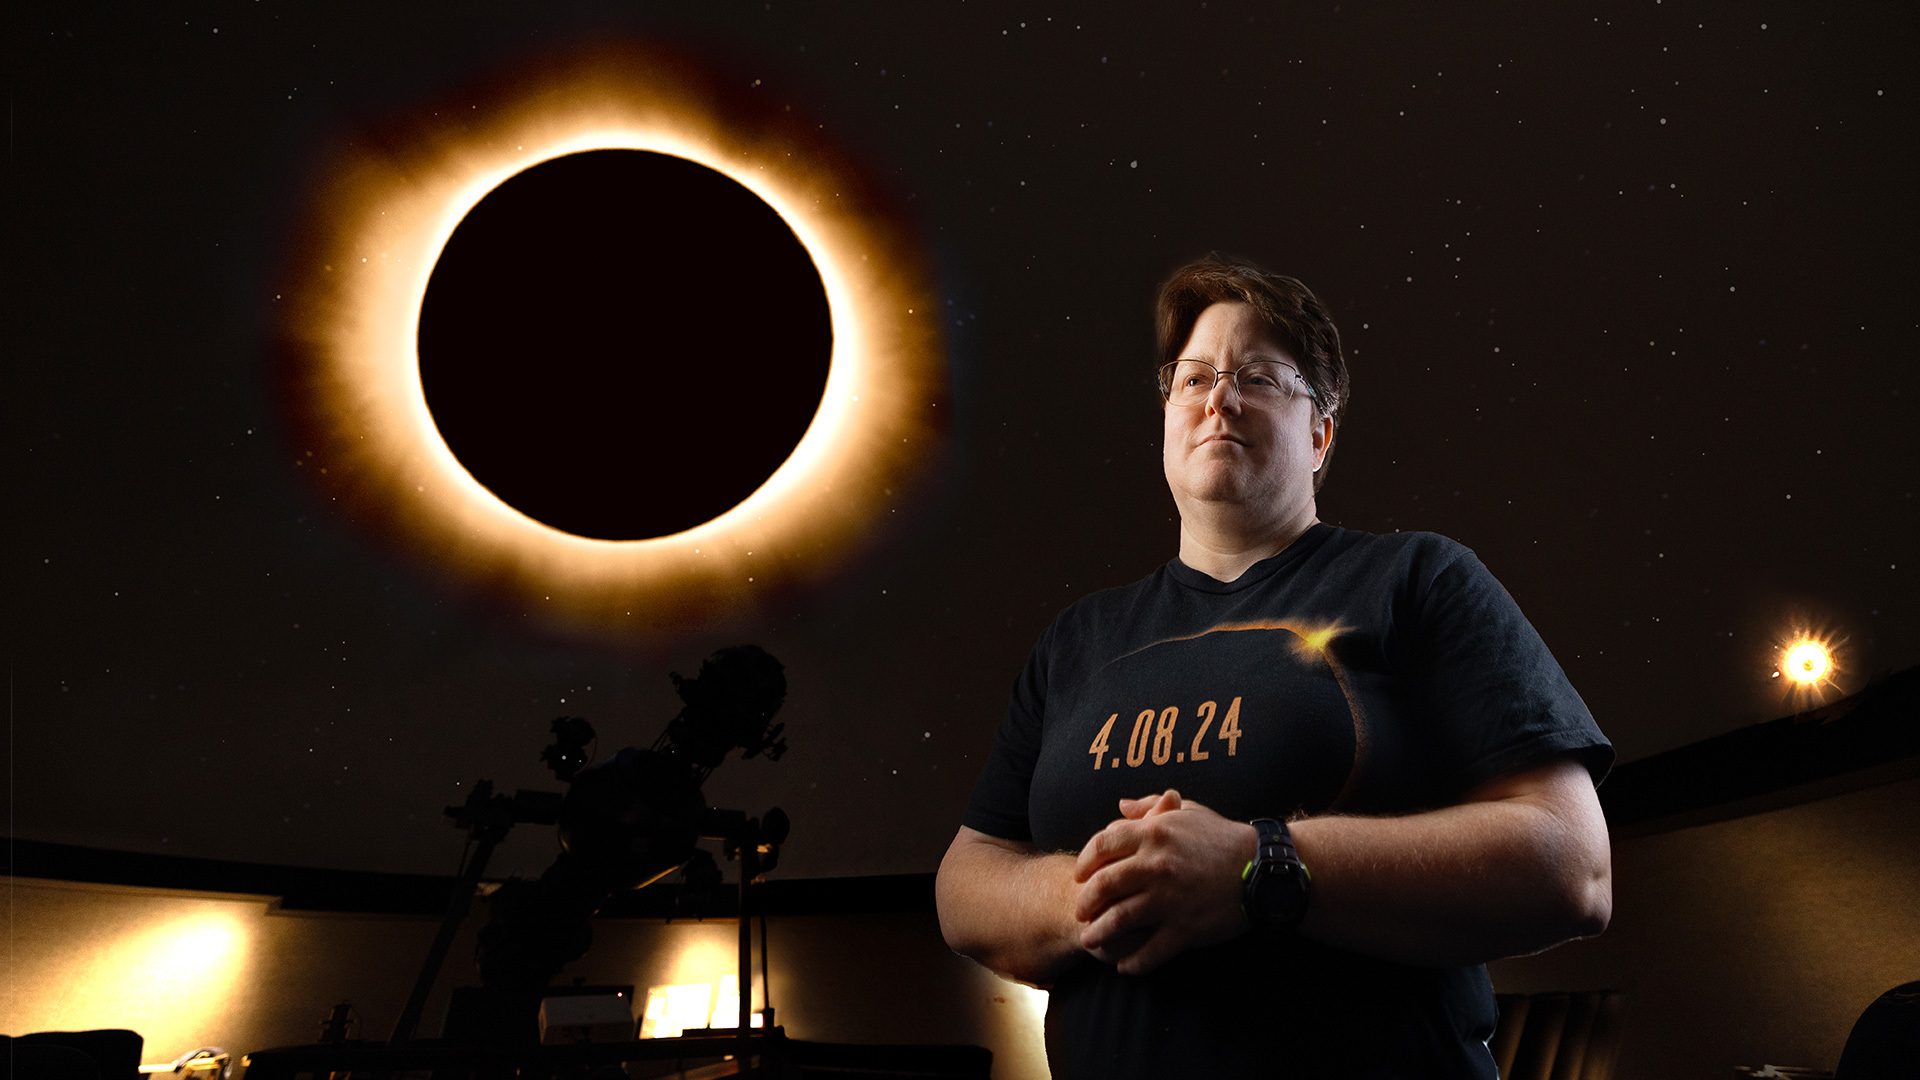 Kate Dellenbusch stands in front of an image of a solar eclipse.